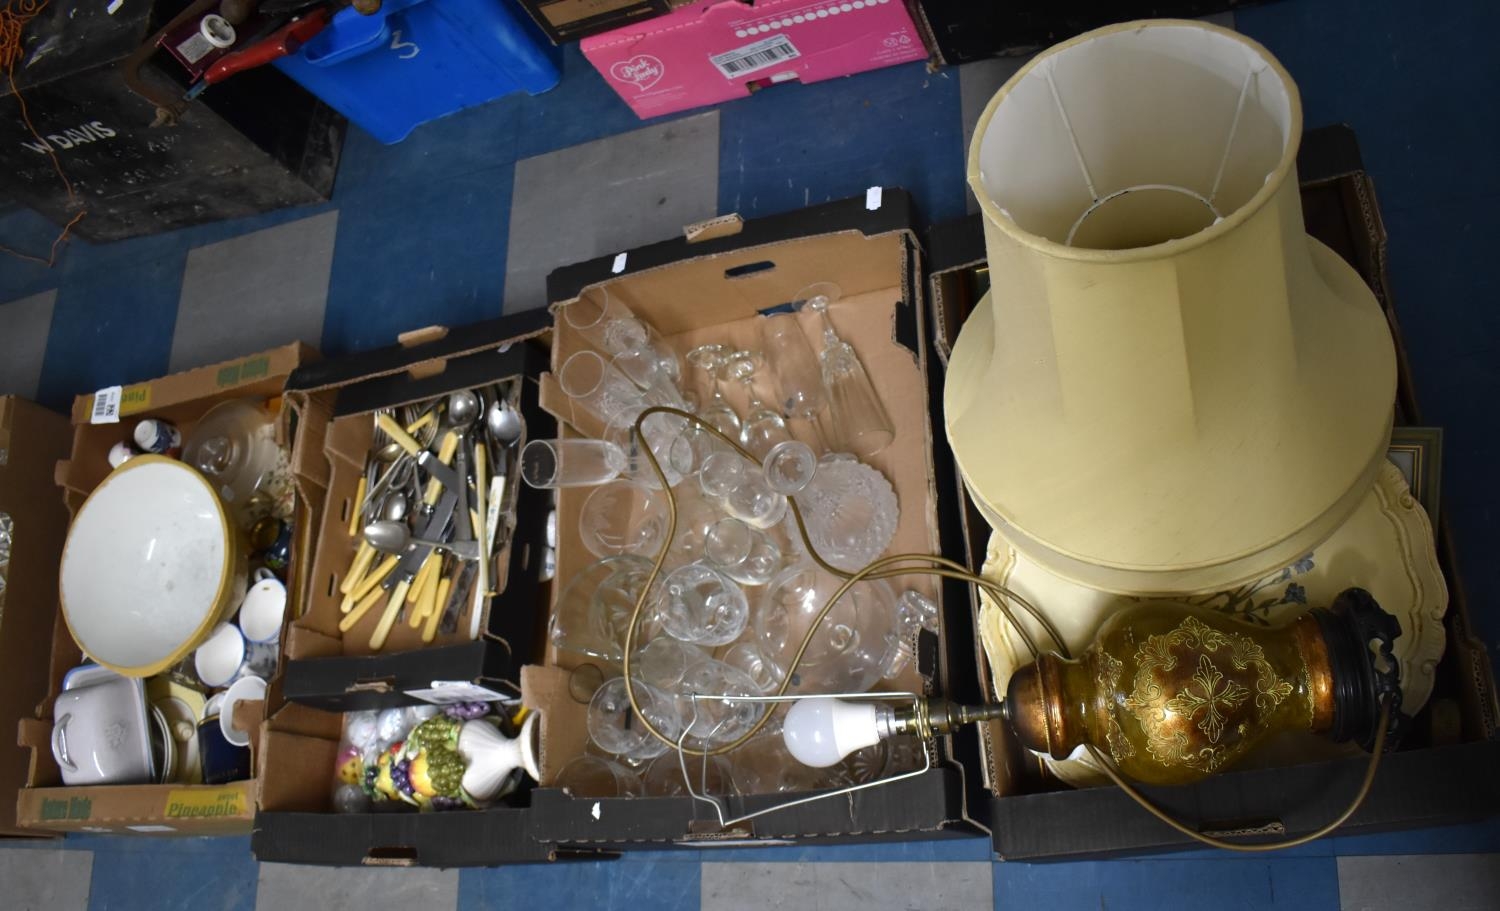 Four Boxes of Various Ceramics, Cutlery, Glassware, Silver Plated and Other Photo Frames, Lamp